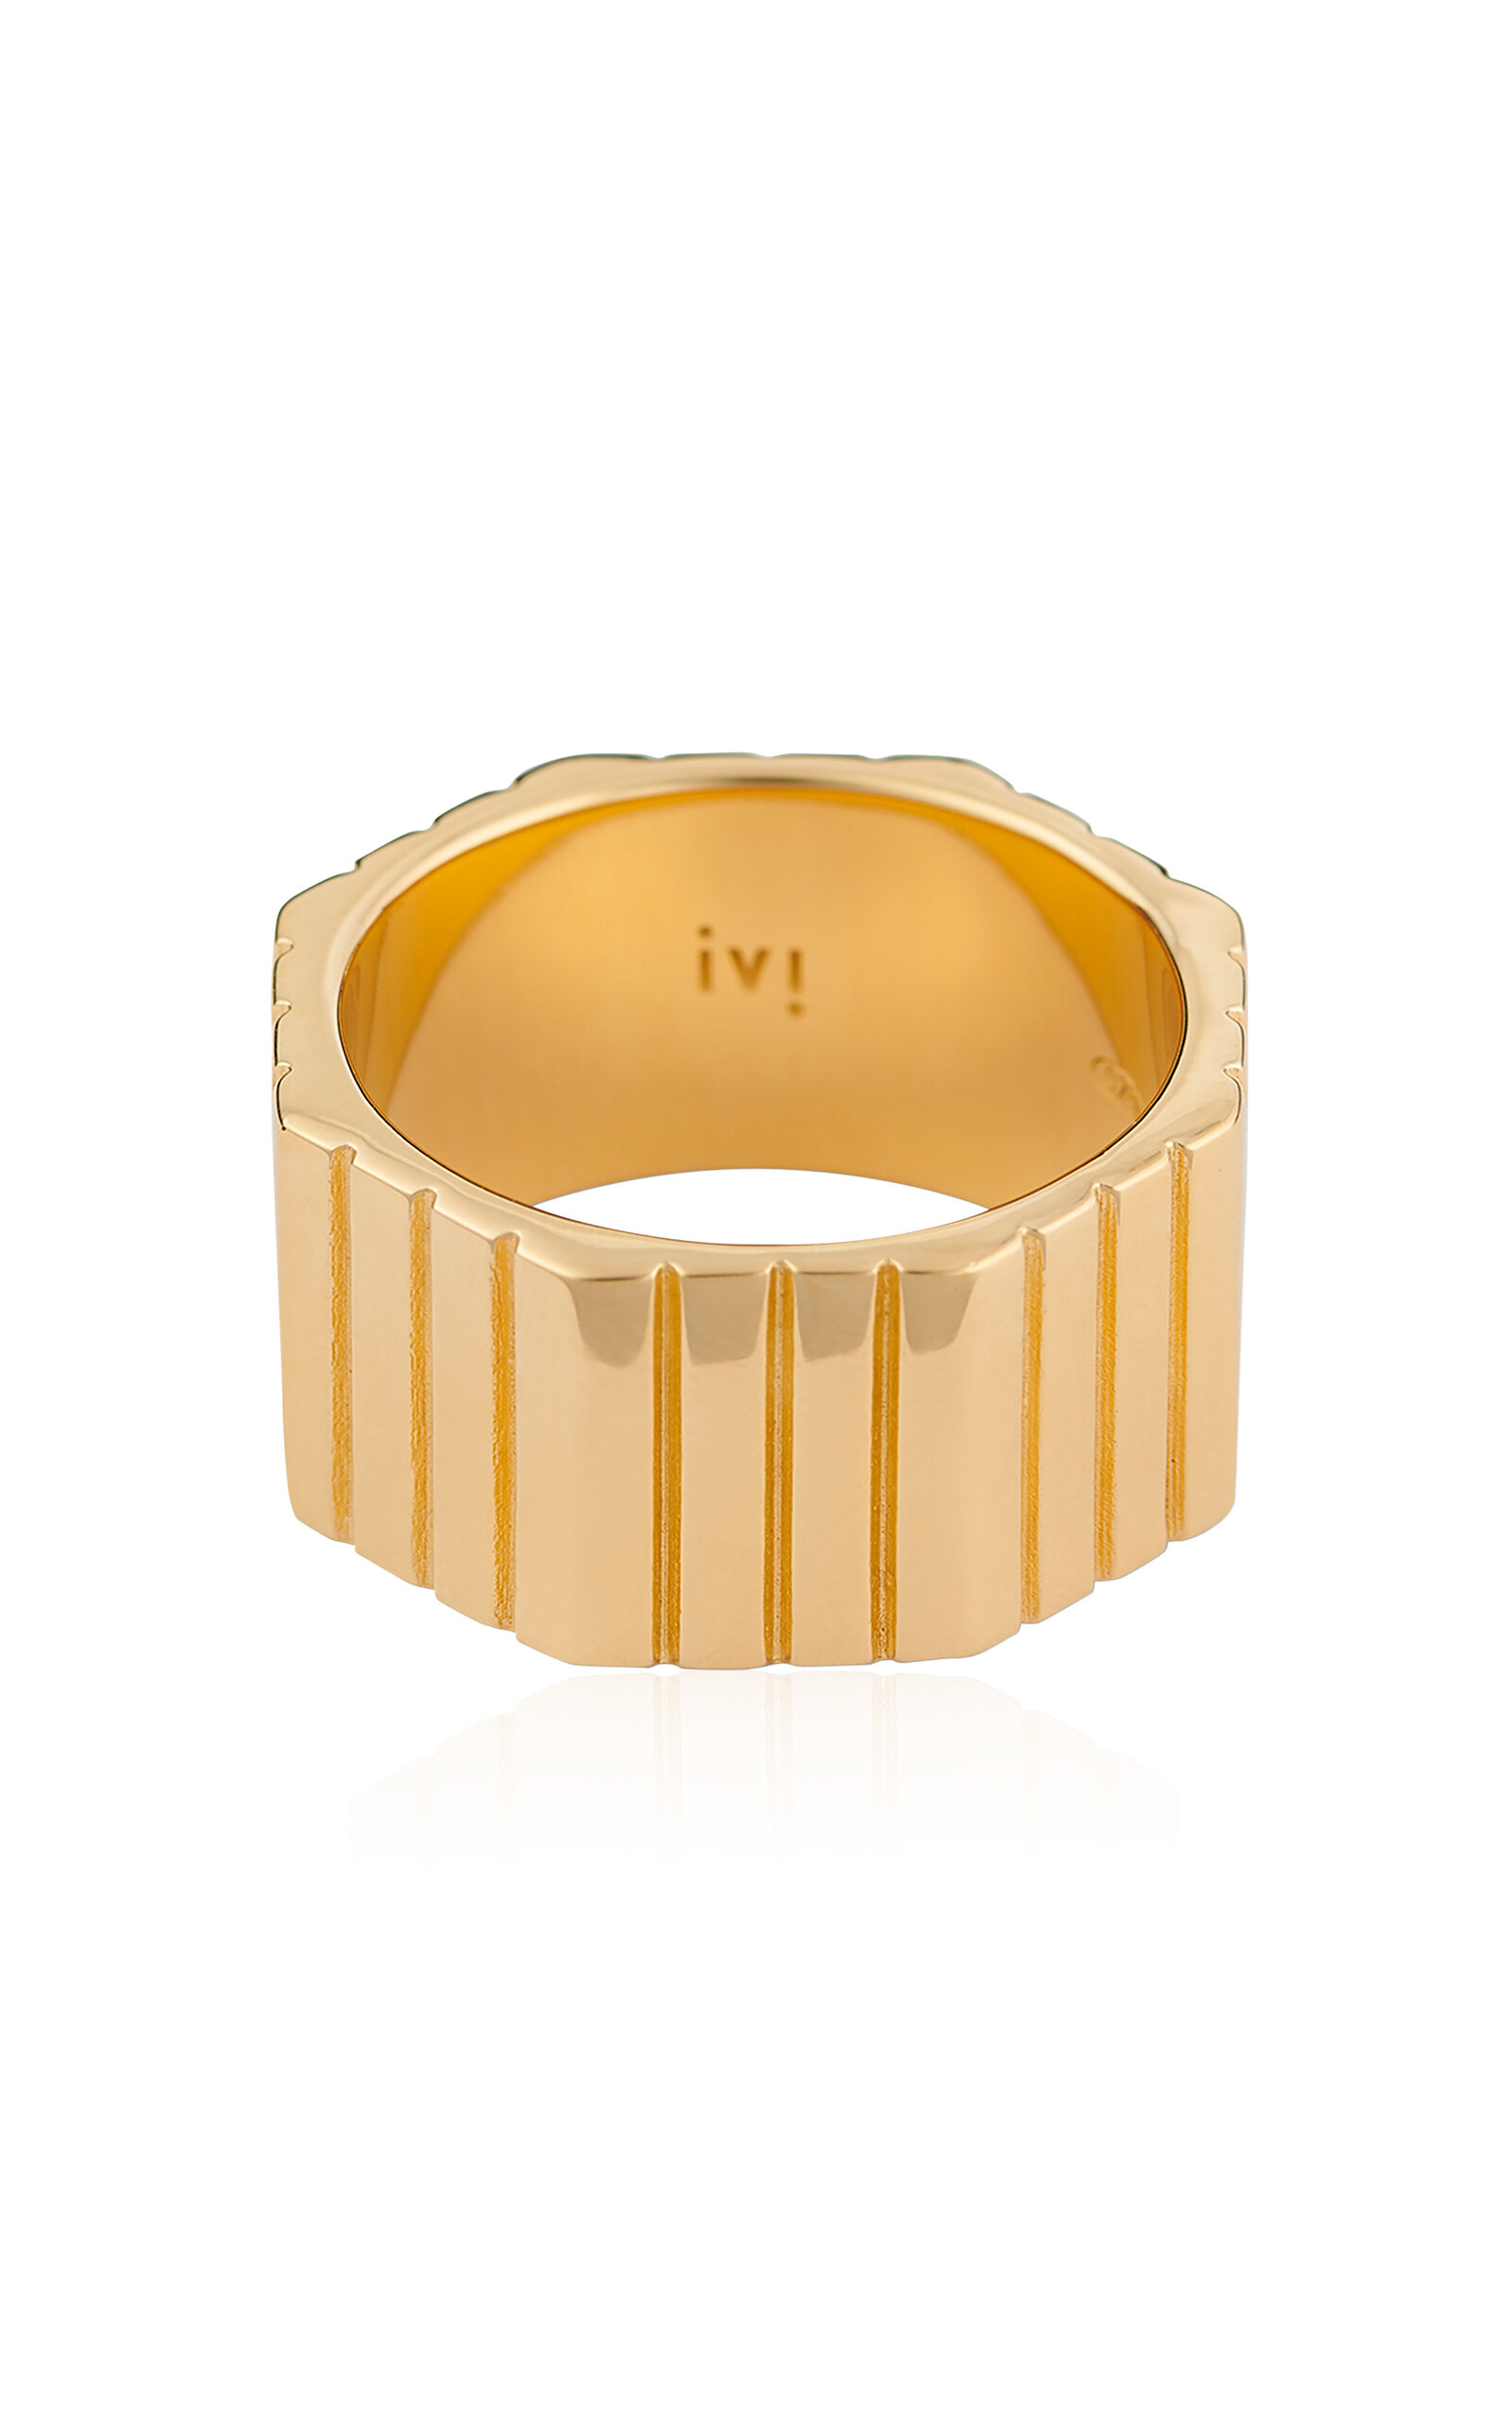 IVI Women's Octagon 18k Gold-Plated Ring